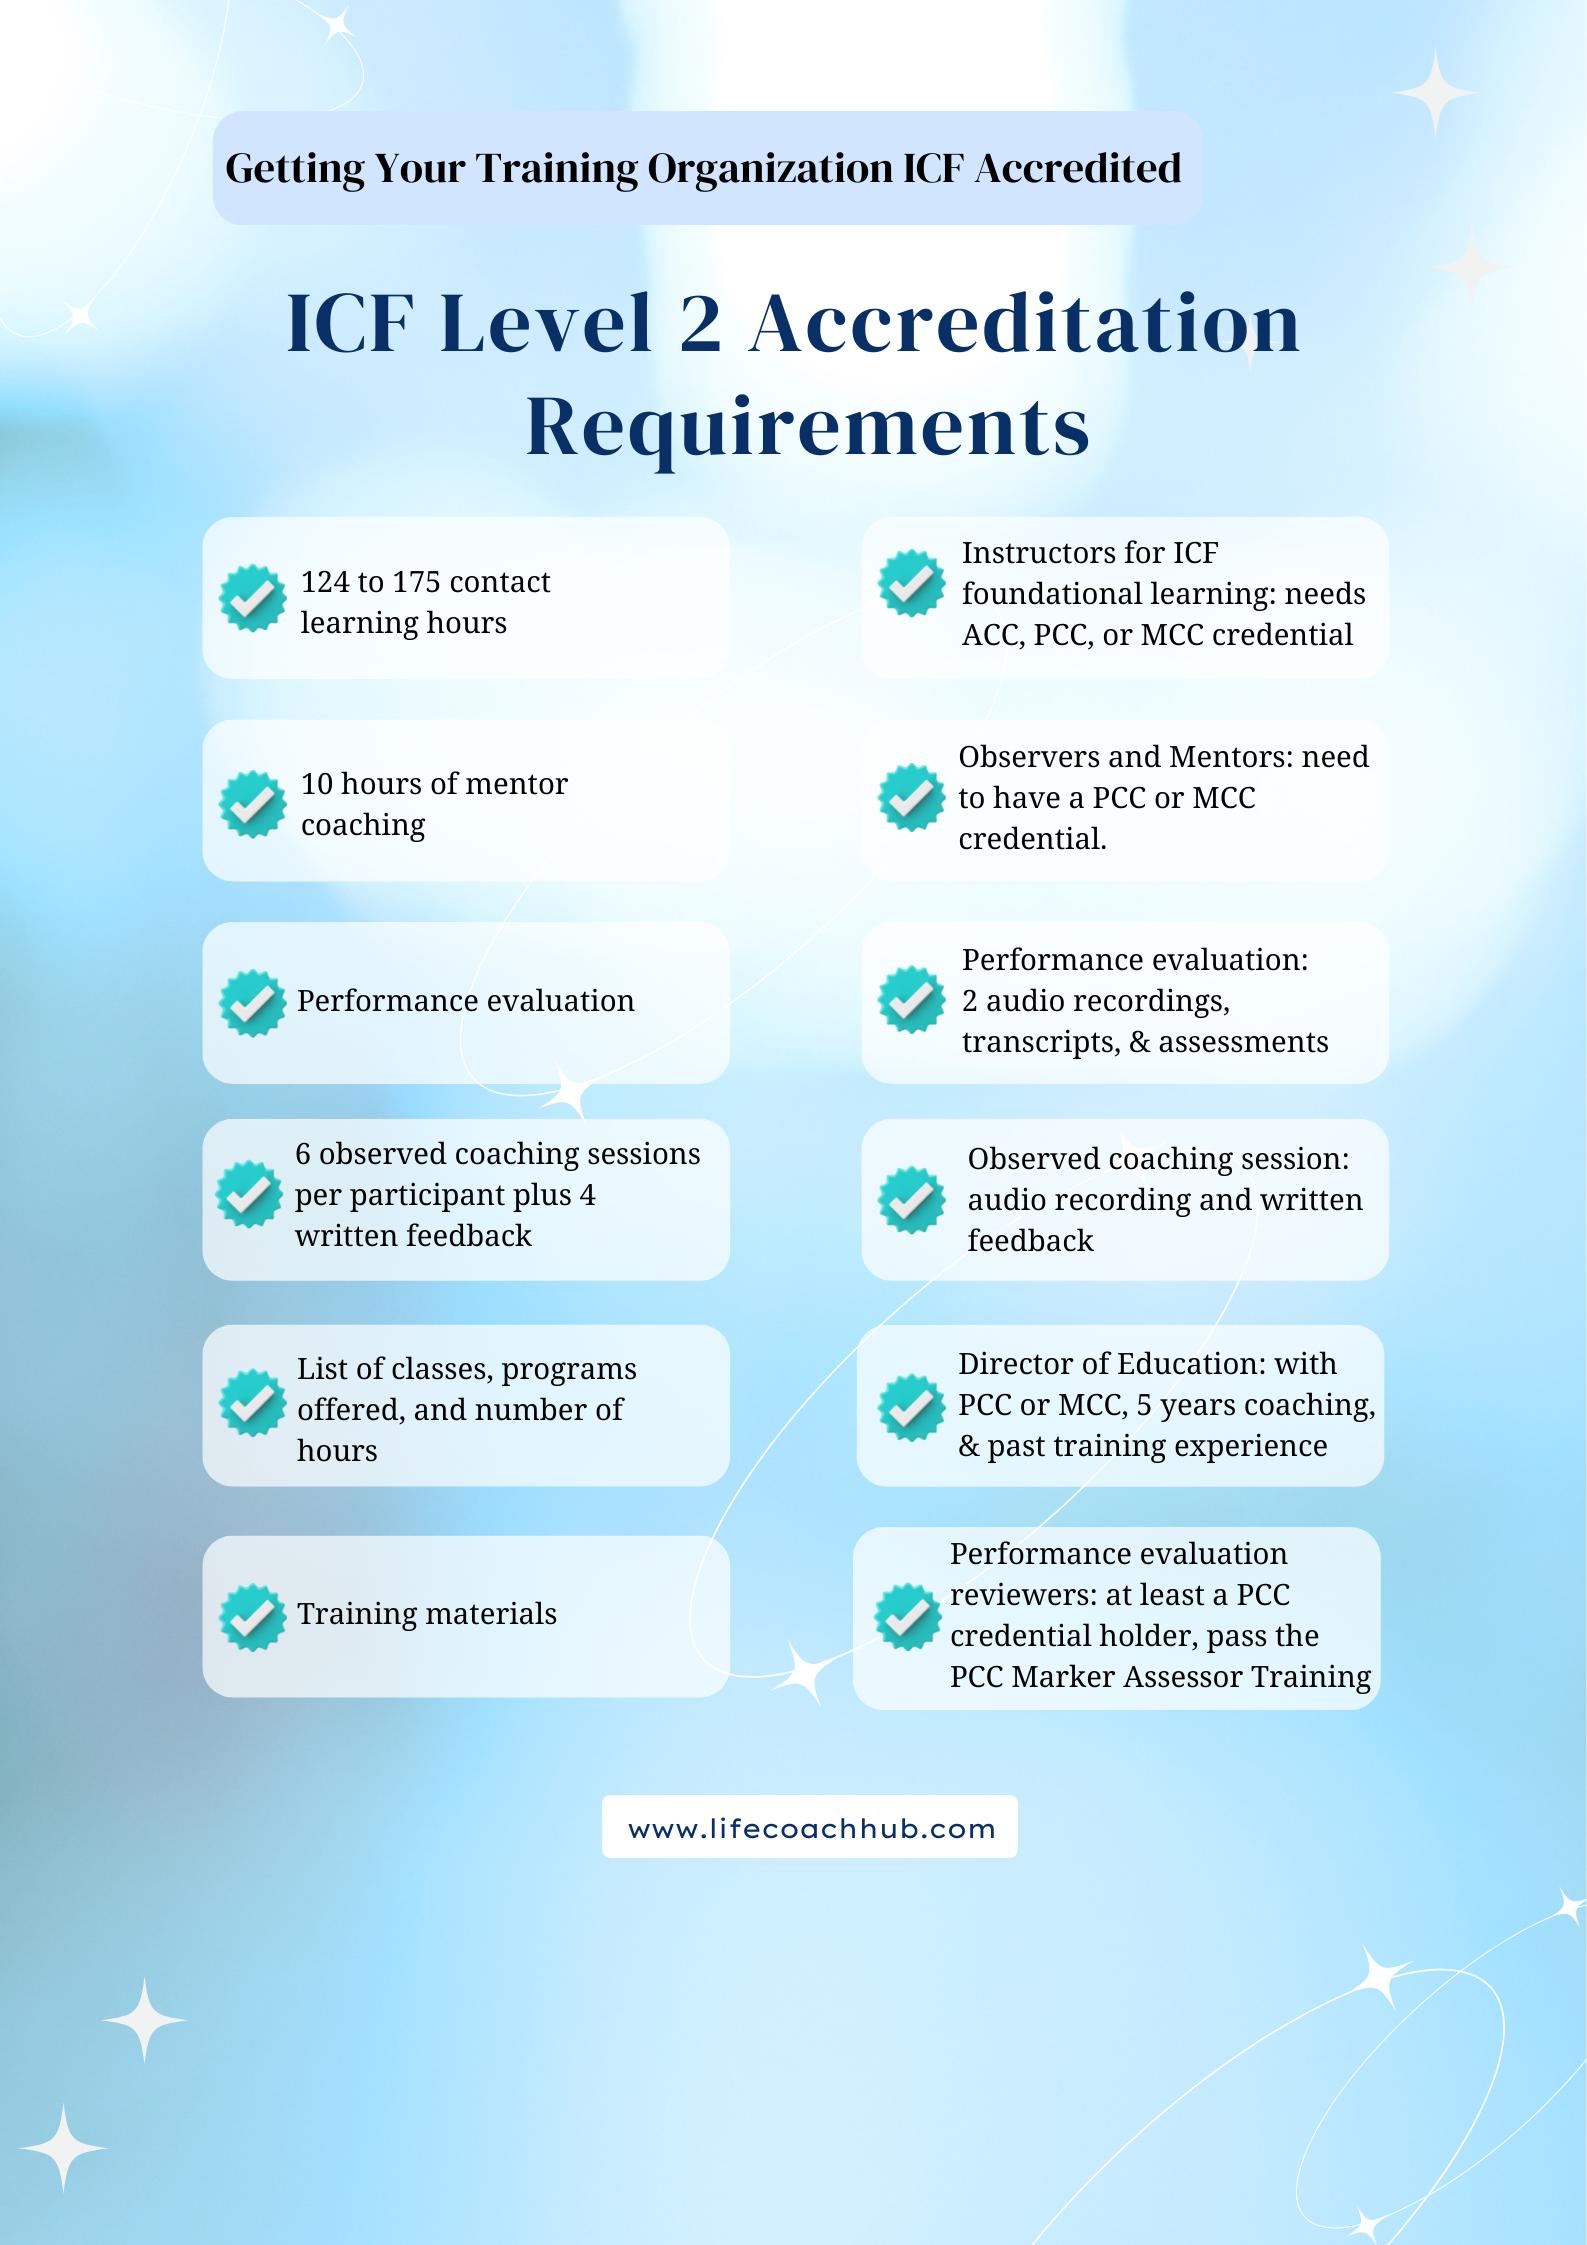 ICF Level 2 Accreditation requirements